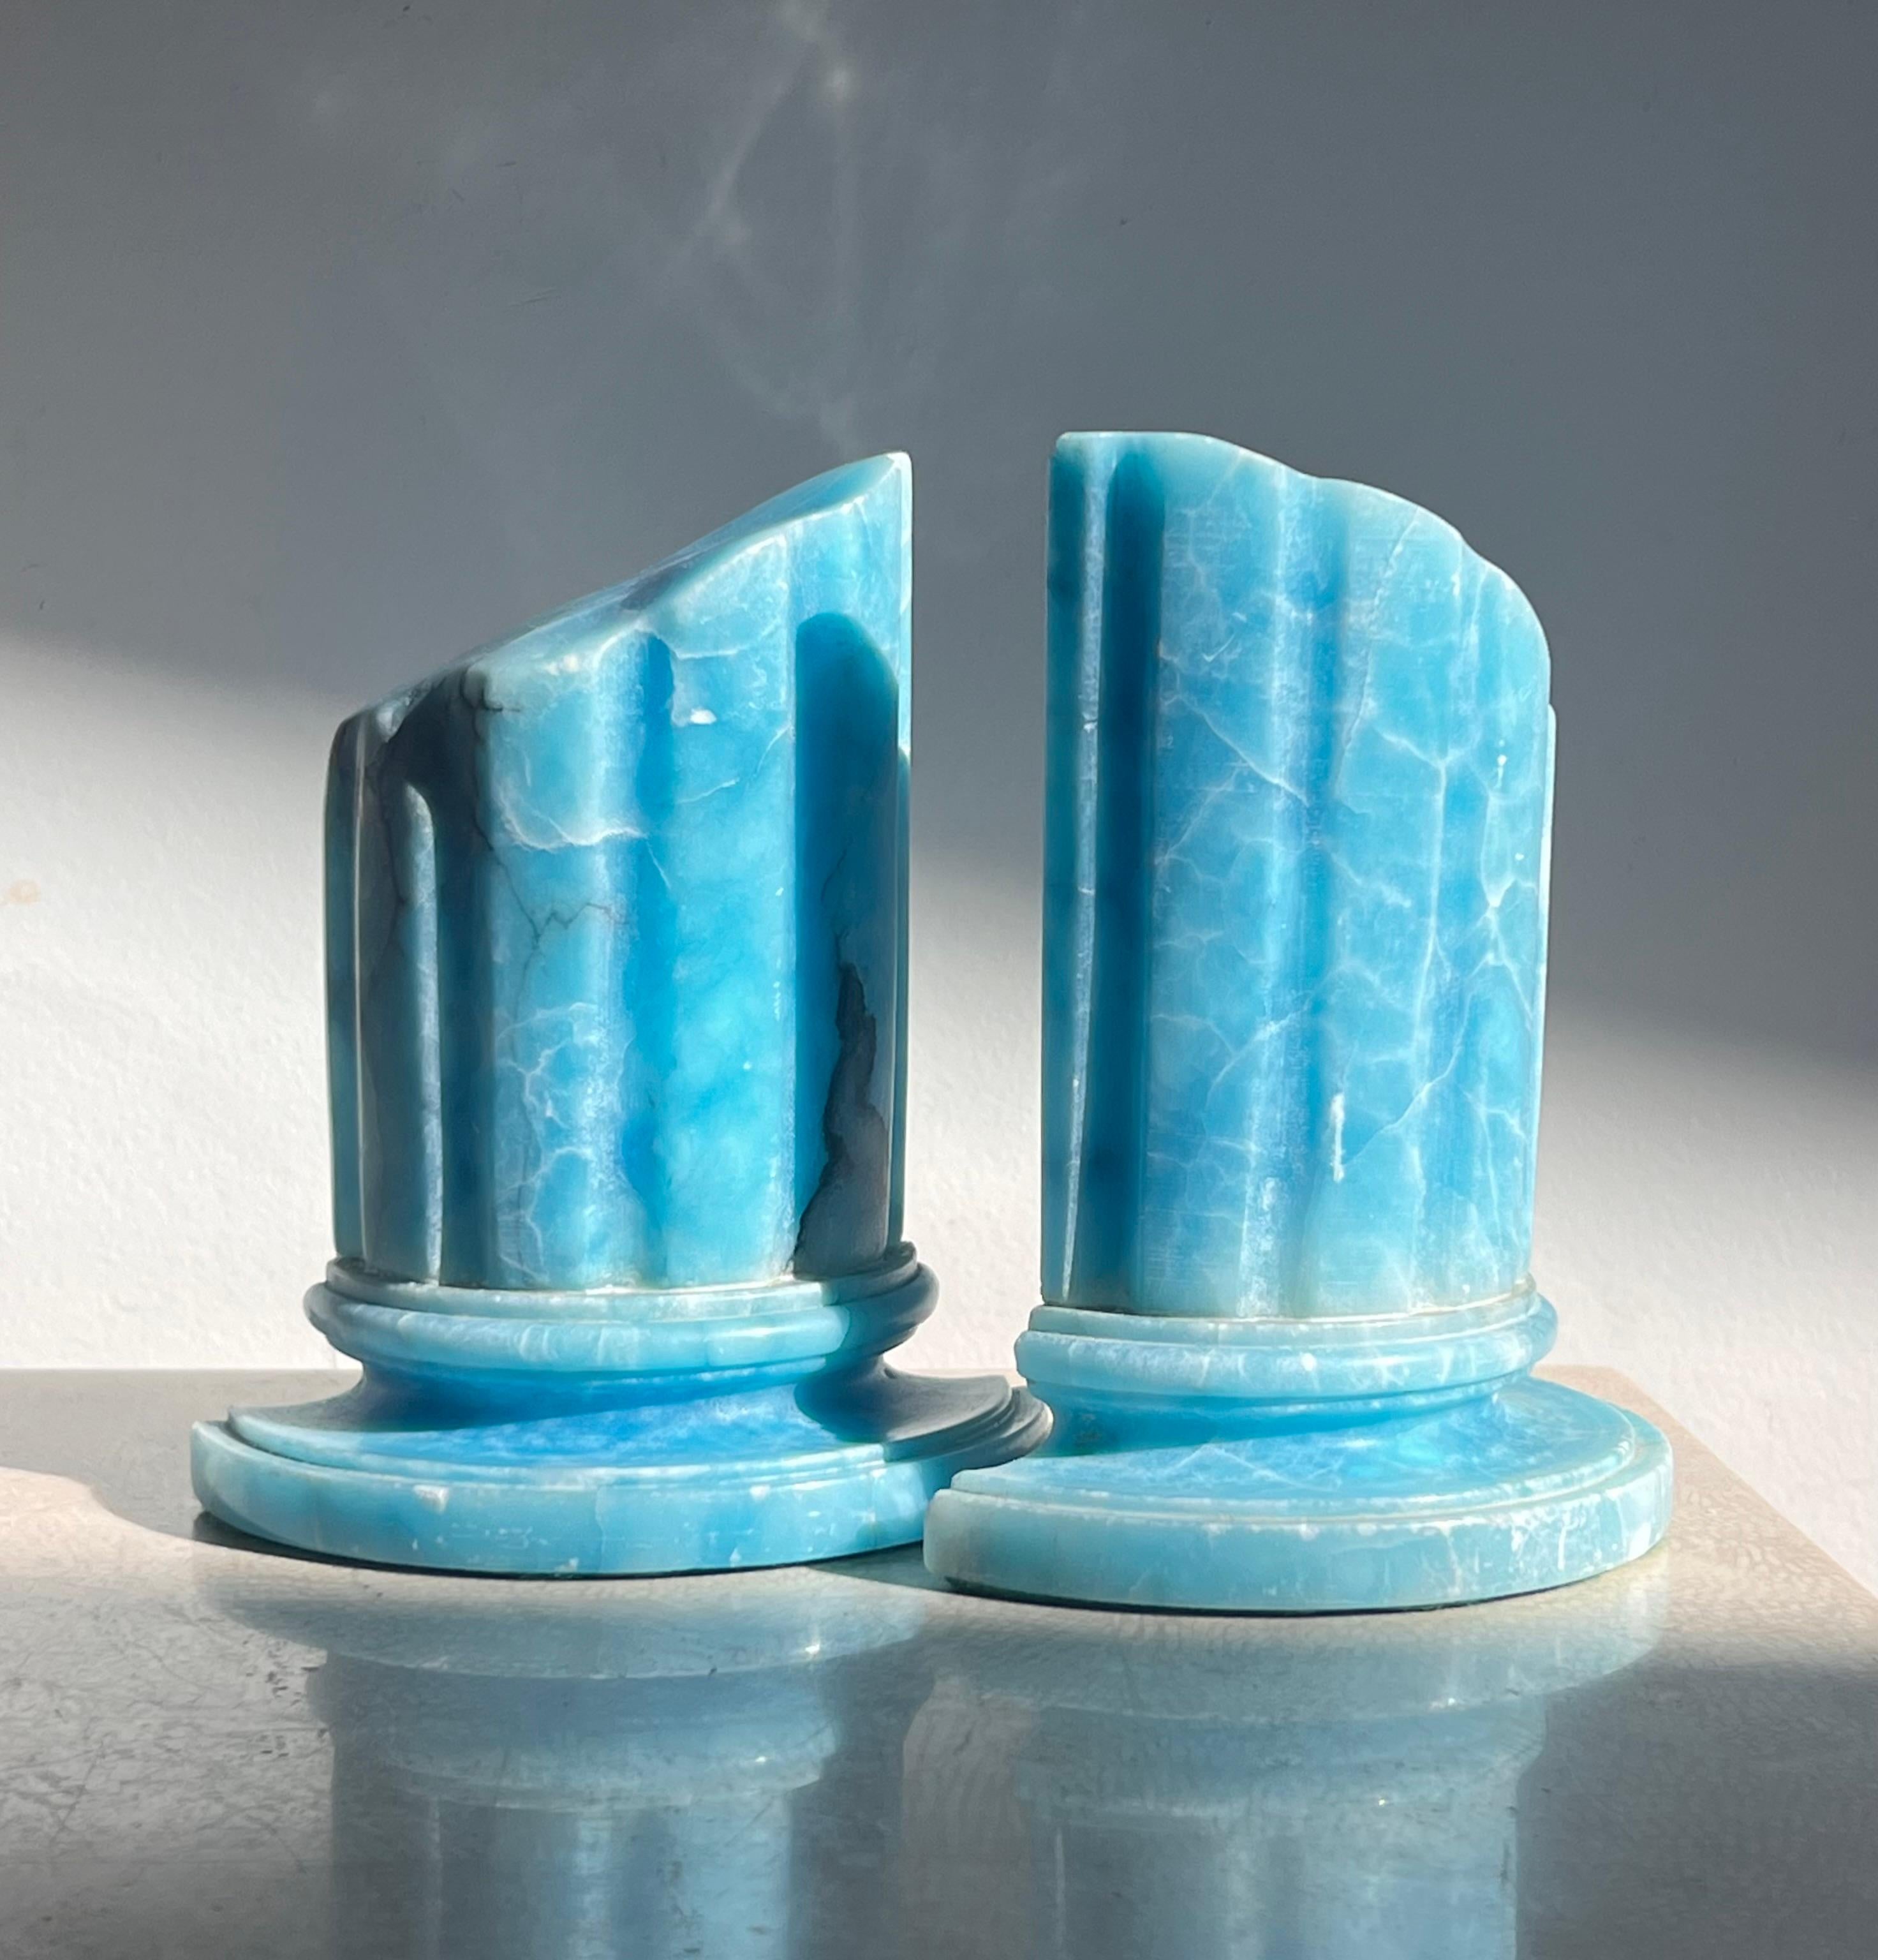 A stunning and rare pair of vintage Italian marble “ruins” bookends in swimming pool blue, 1960s. Hand-carved in the shapes of neoclassical ruinous columns. Pick up in LA or we ship worldwide. 
4.5” D x 4.75” W x 5.75” H